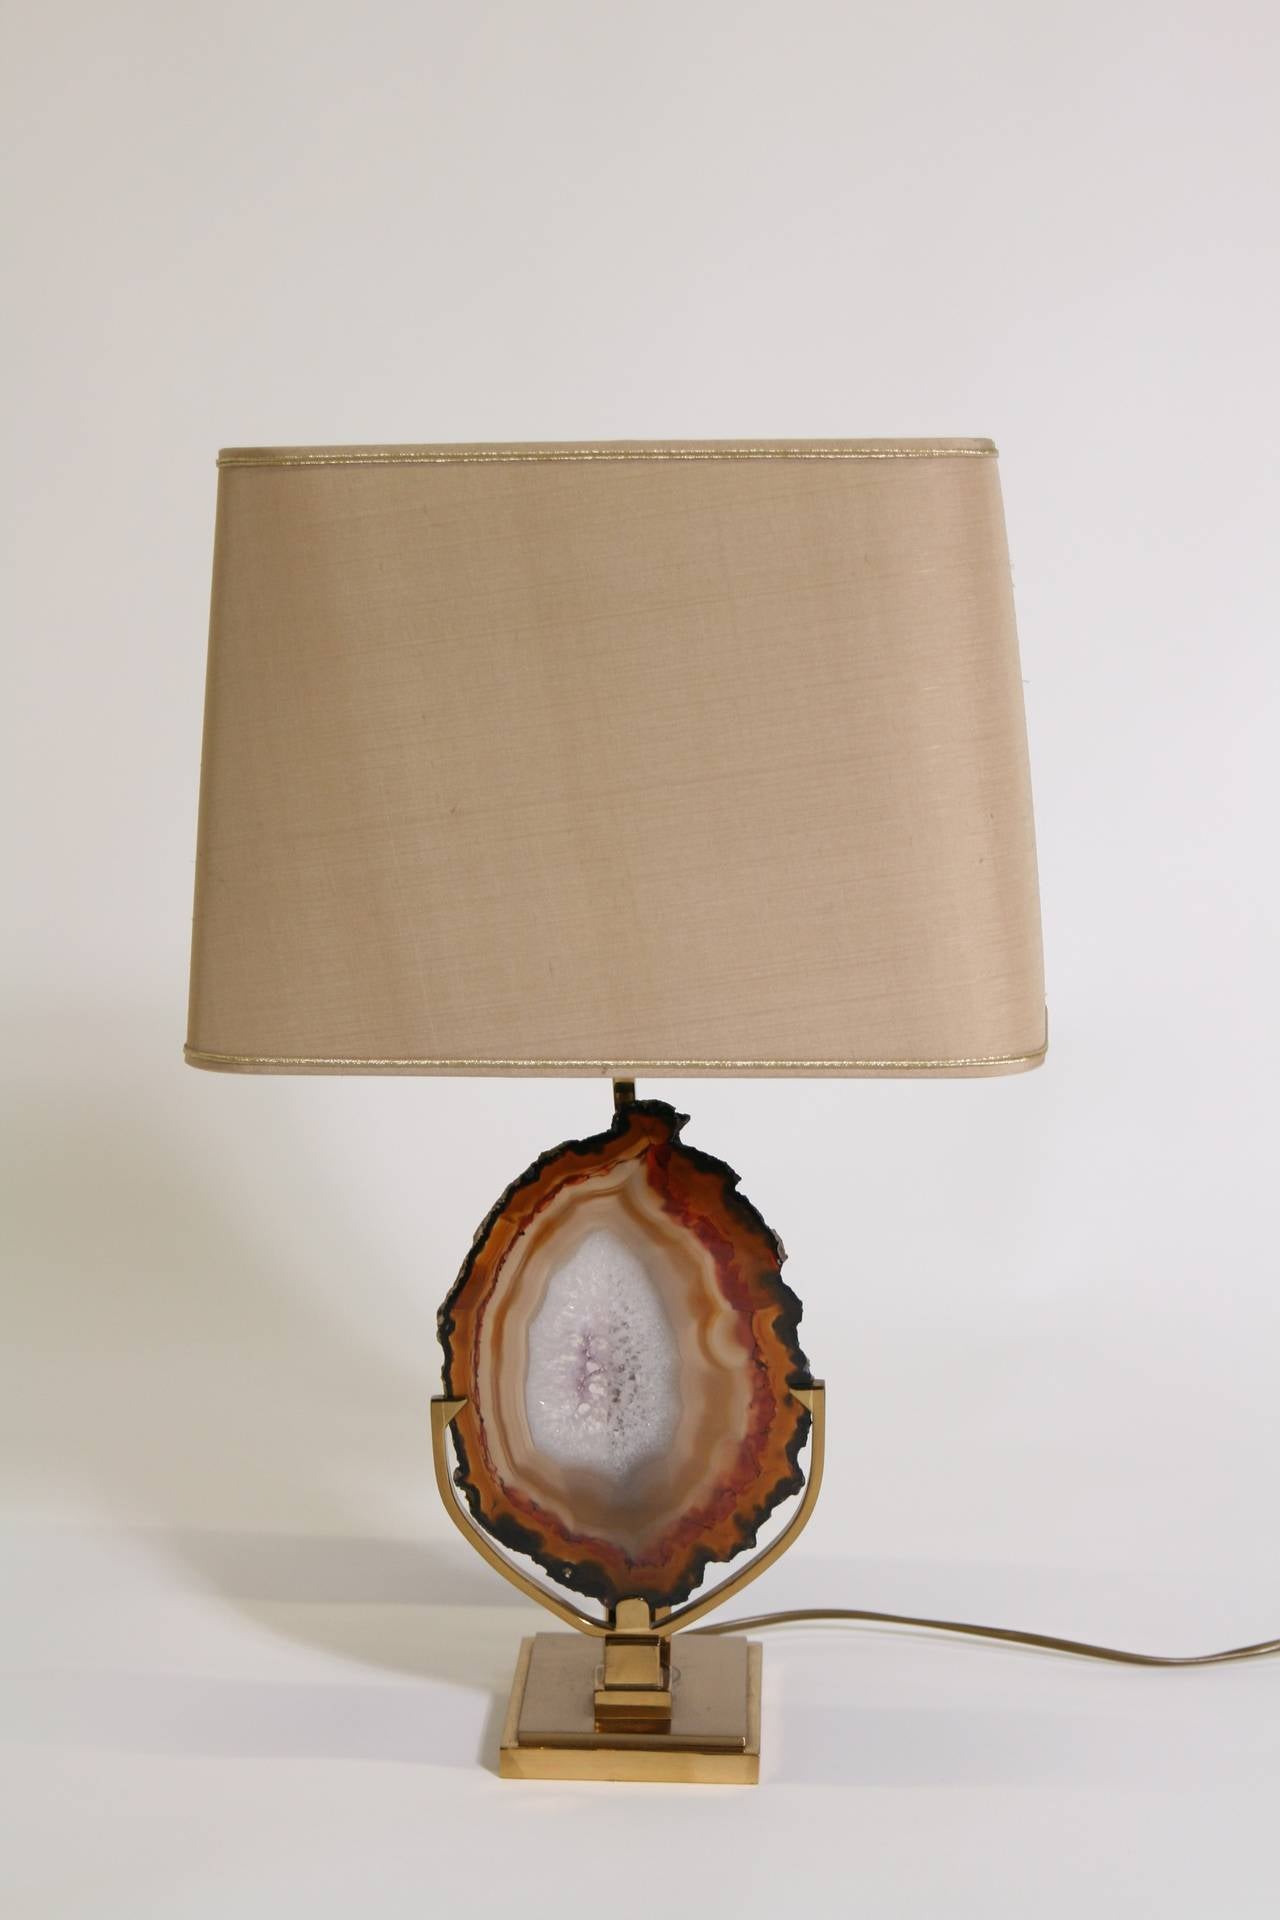 Brass table lamp with a slice of agate.